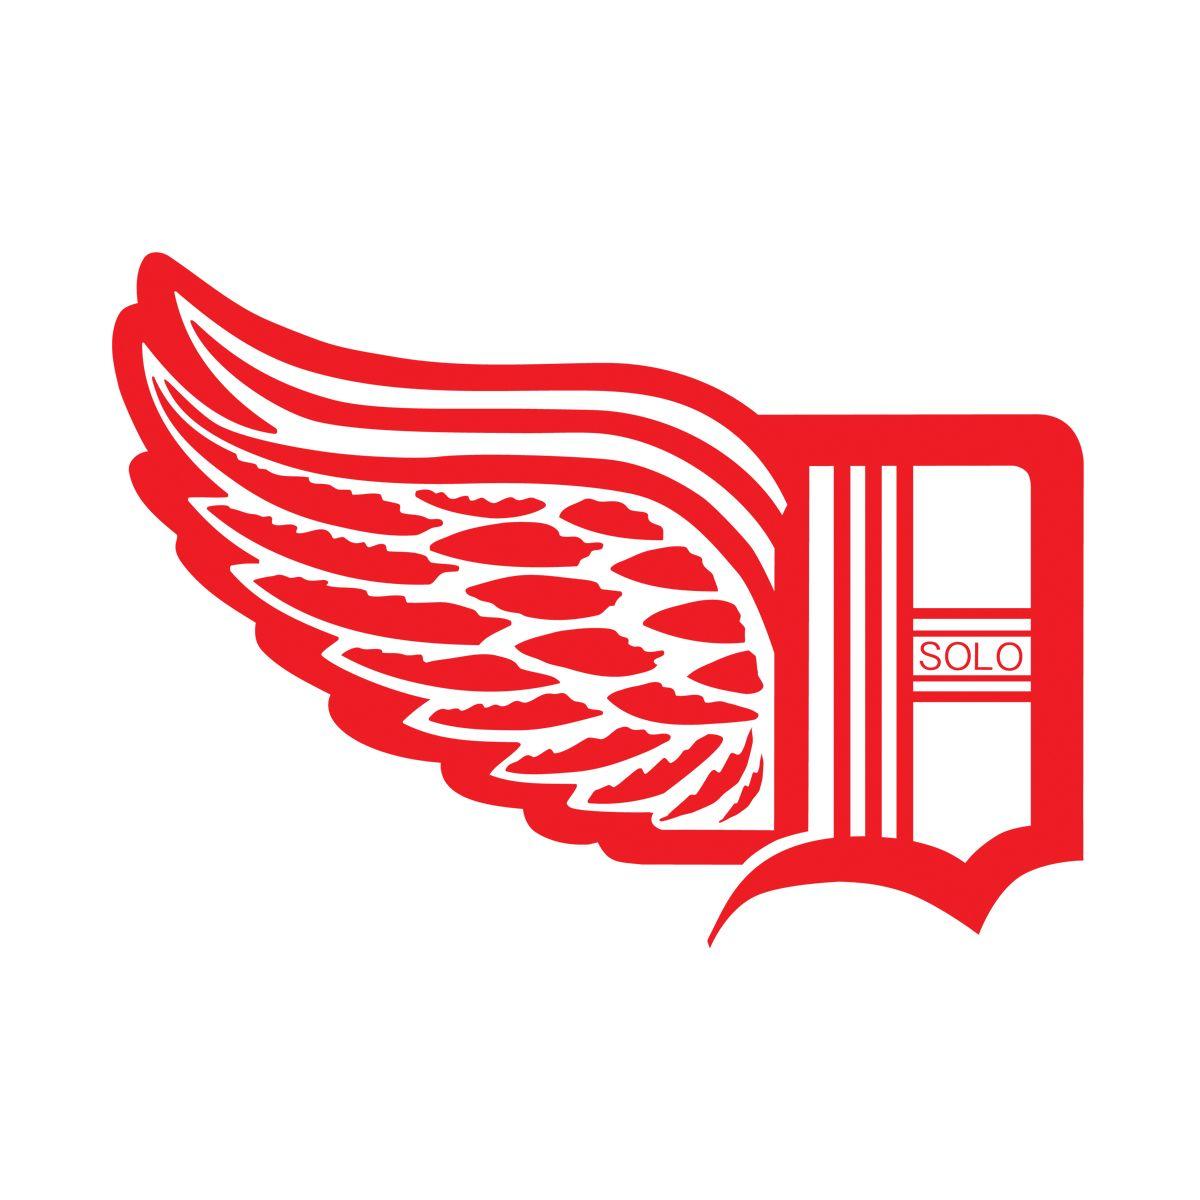 Classic Detroit Red Wings Logo - Red wings winter classic Logos